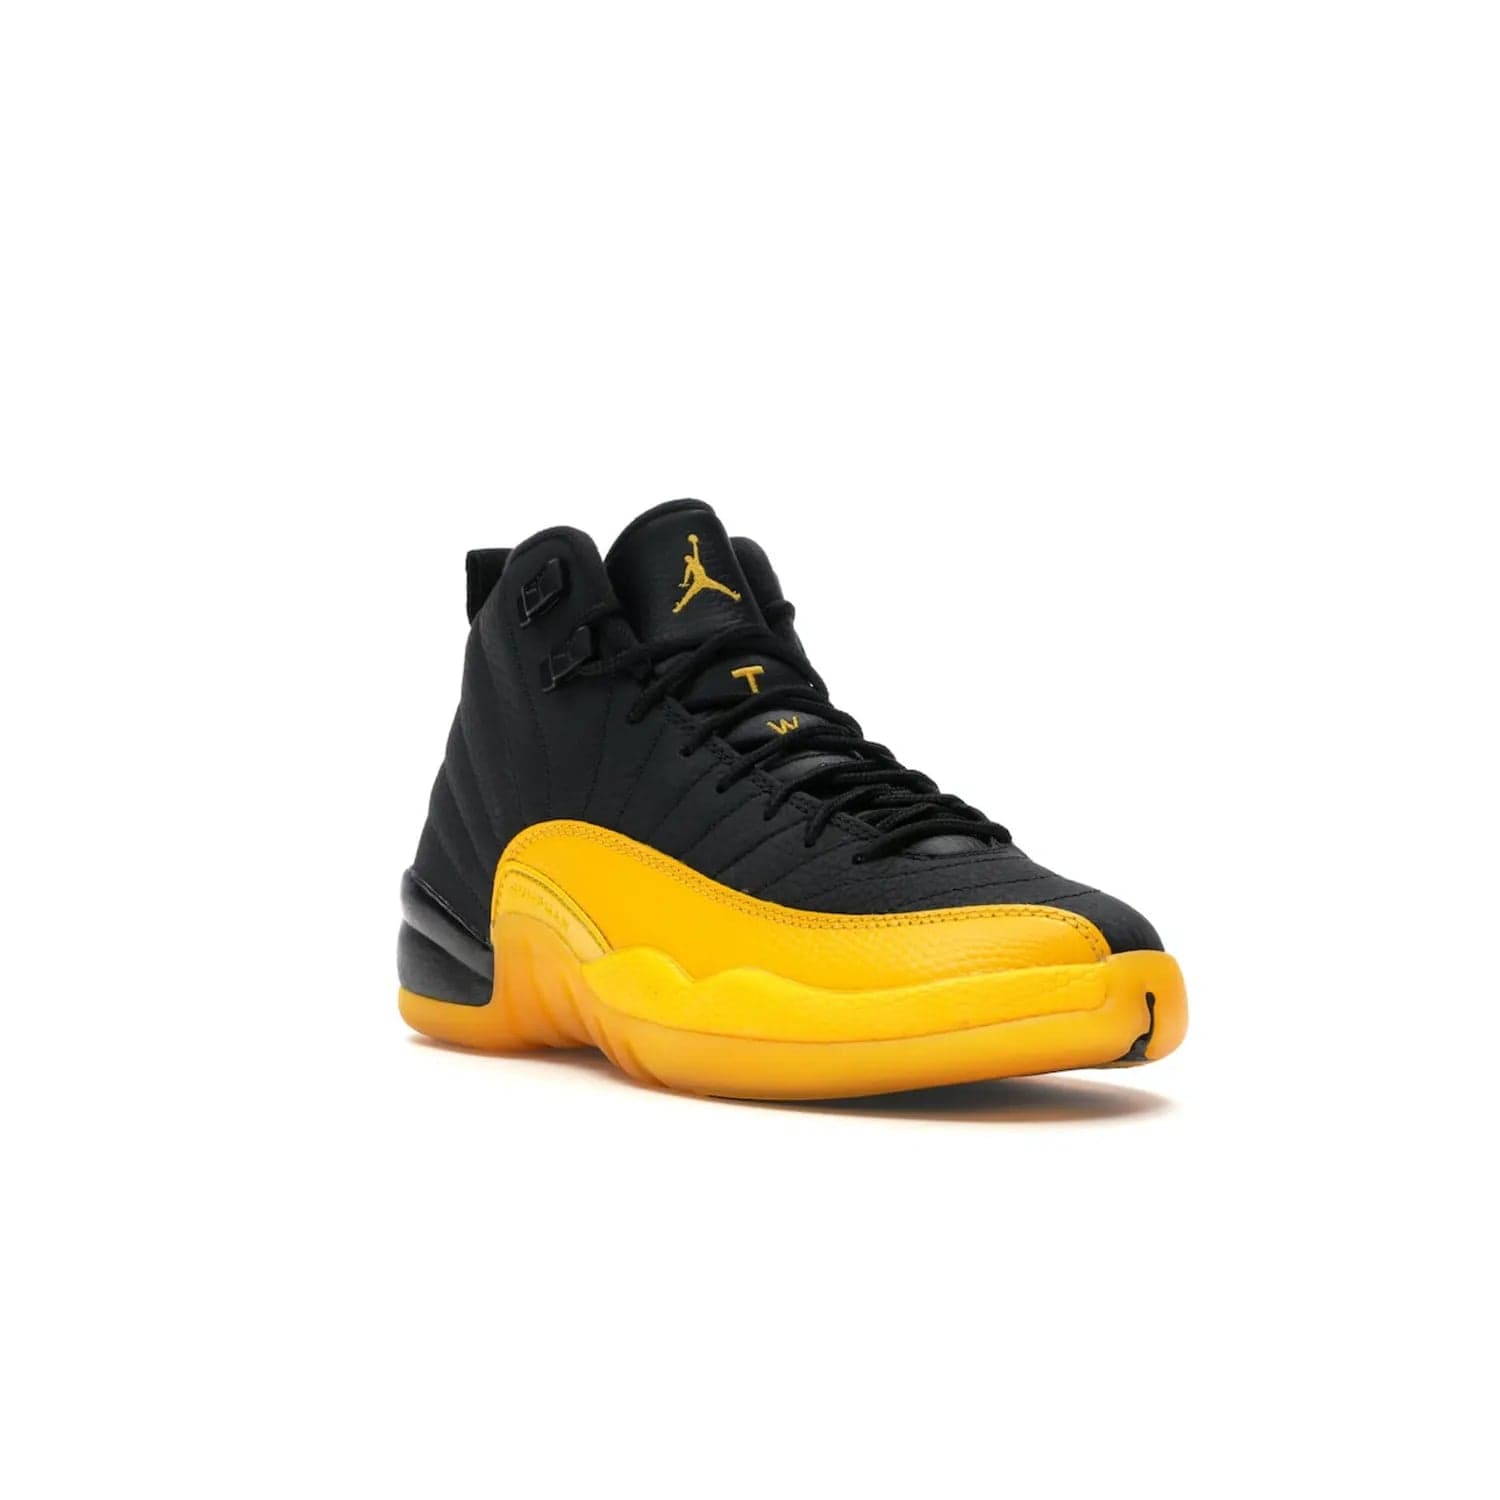 Jordan 12 Retro Black University Gold (GS) - Image 6 - Only at www.BallersClubKickz.com - Upgrade your kid's shoe collection with the Jordan 12 Retro Black University Gold. With classic style, black tumbled leather upper, and University Gold accents, it's a great summer look. Out July 2020.